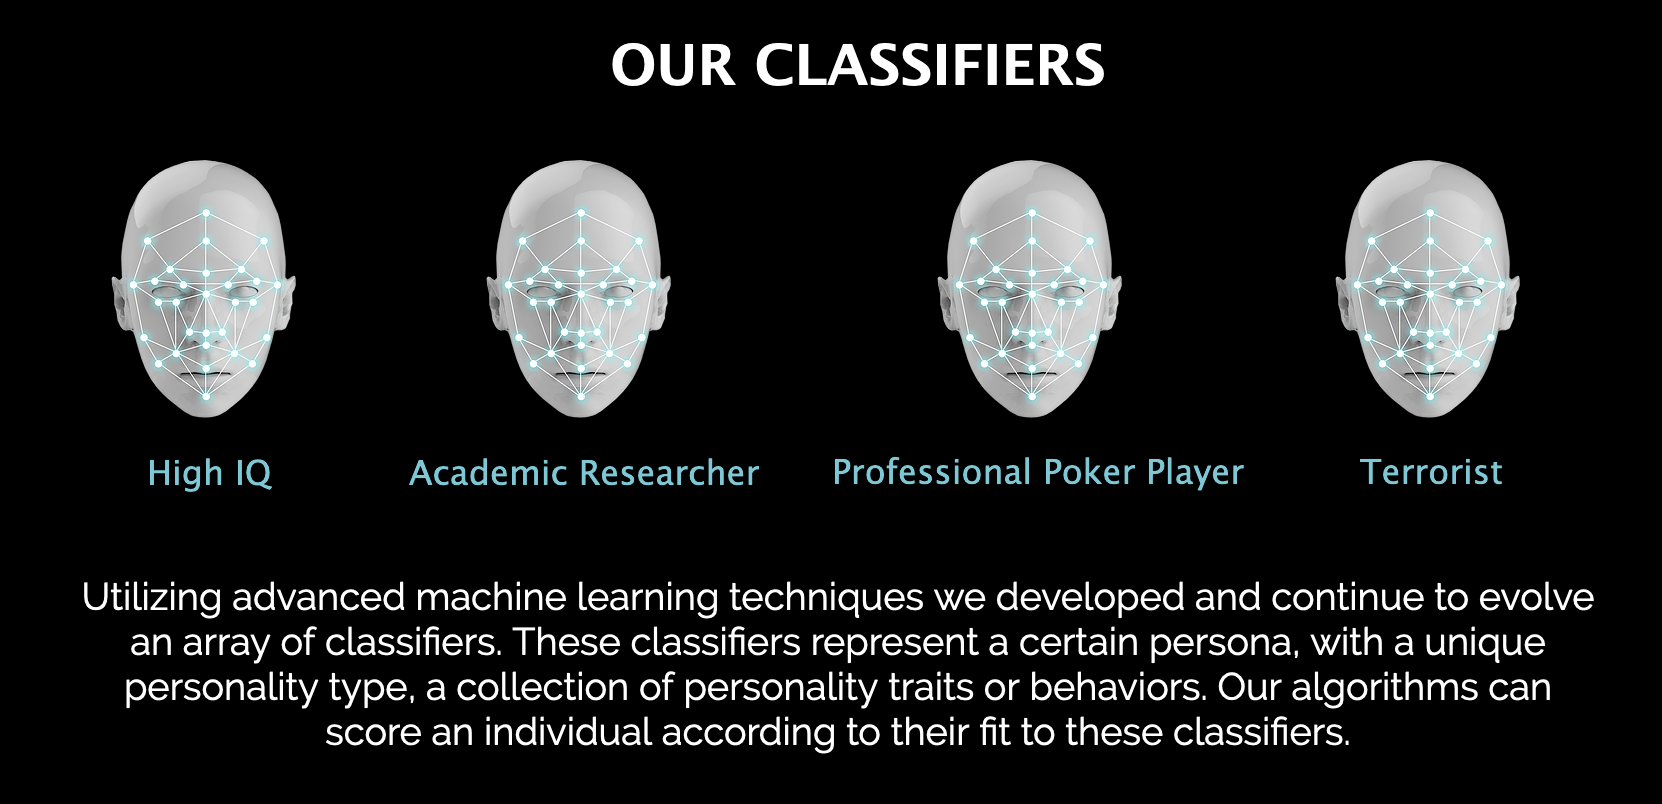 Startup claiming to classify people based on their facial structure